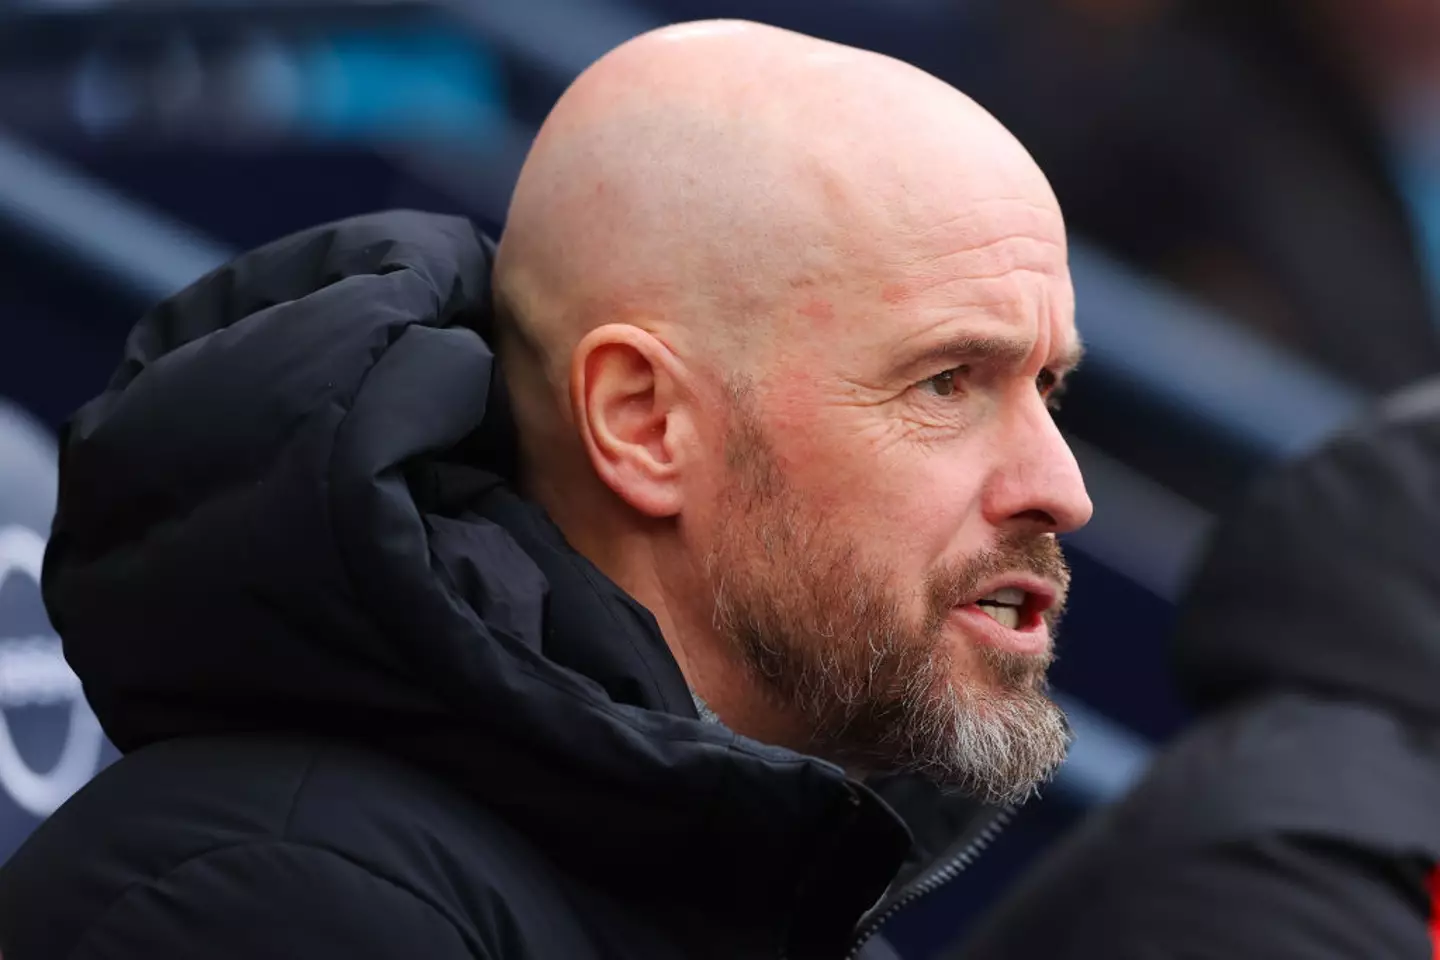 Ten Hag claims United could 'easily' have 75 wins under him without injuries (Image: Getty)